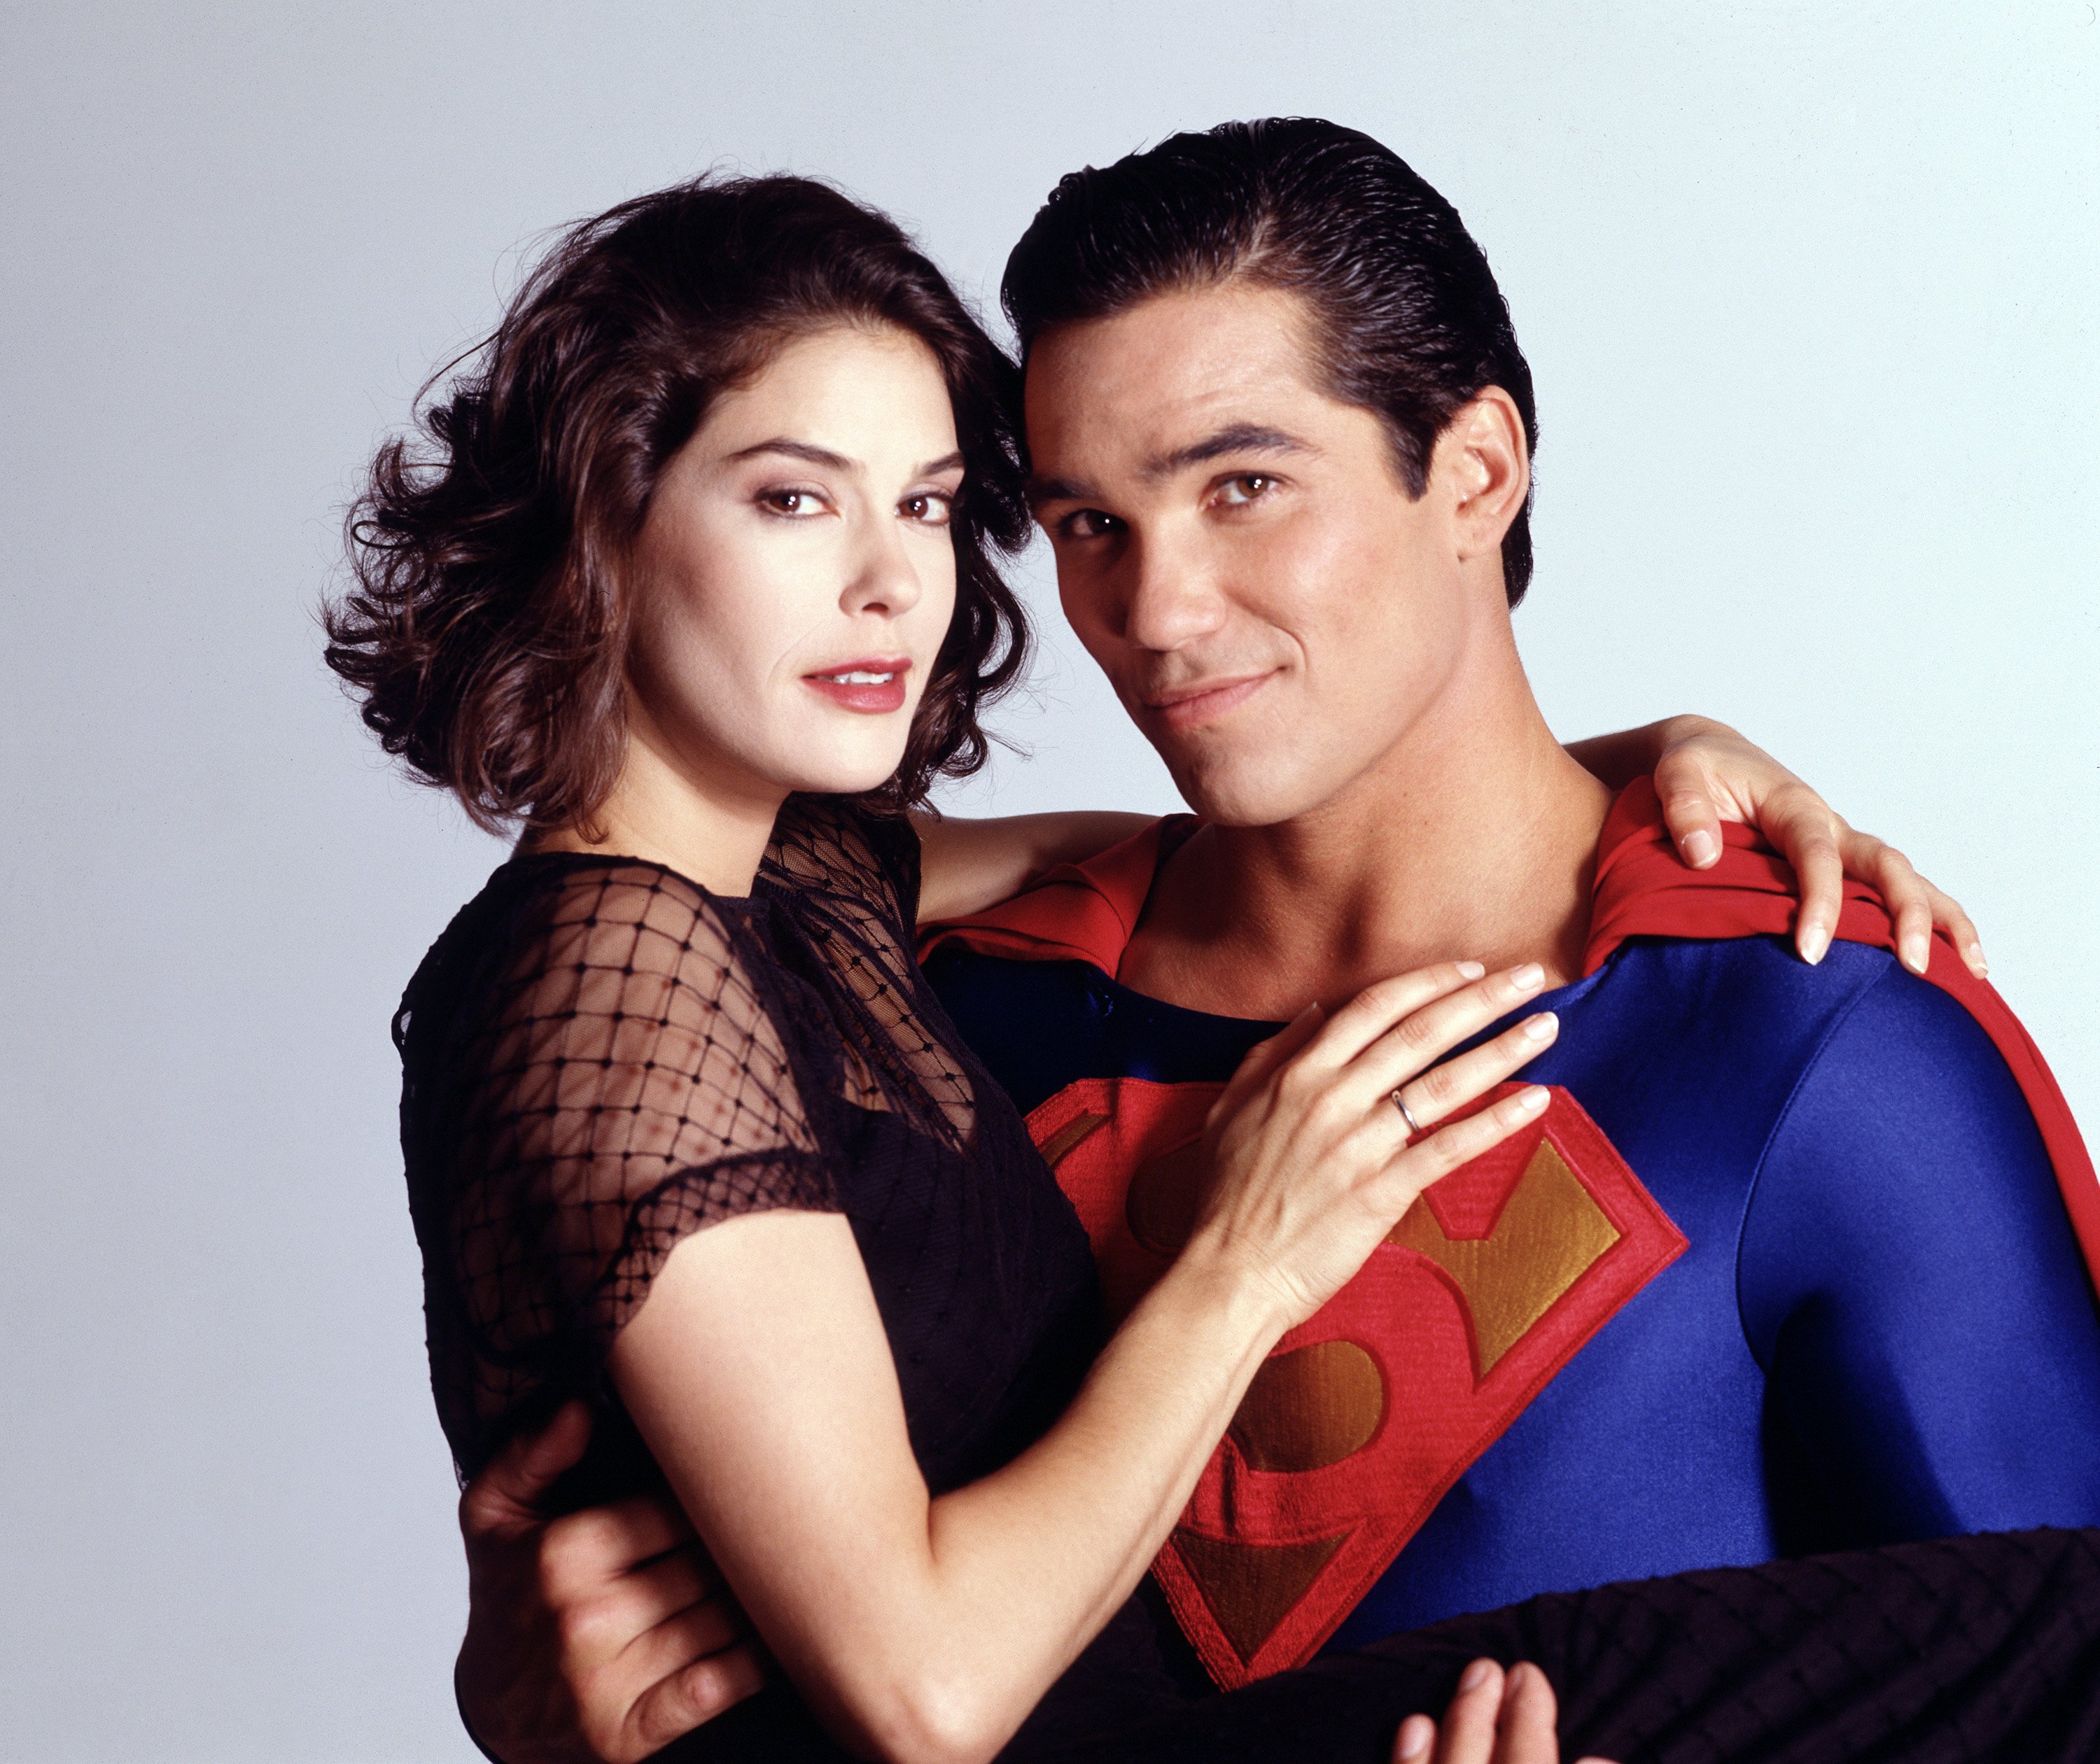 Teri Hatcher (as Lois) and Dean Cain (as Superman/Clark Kent) posing together on "Lois & Clark: The New Adventures of Superman" on August 16, 1994 | Source: Getty Images